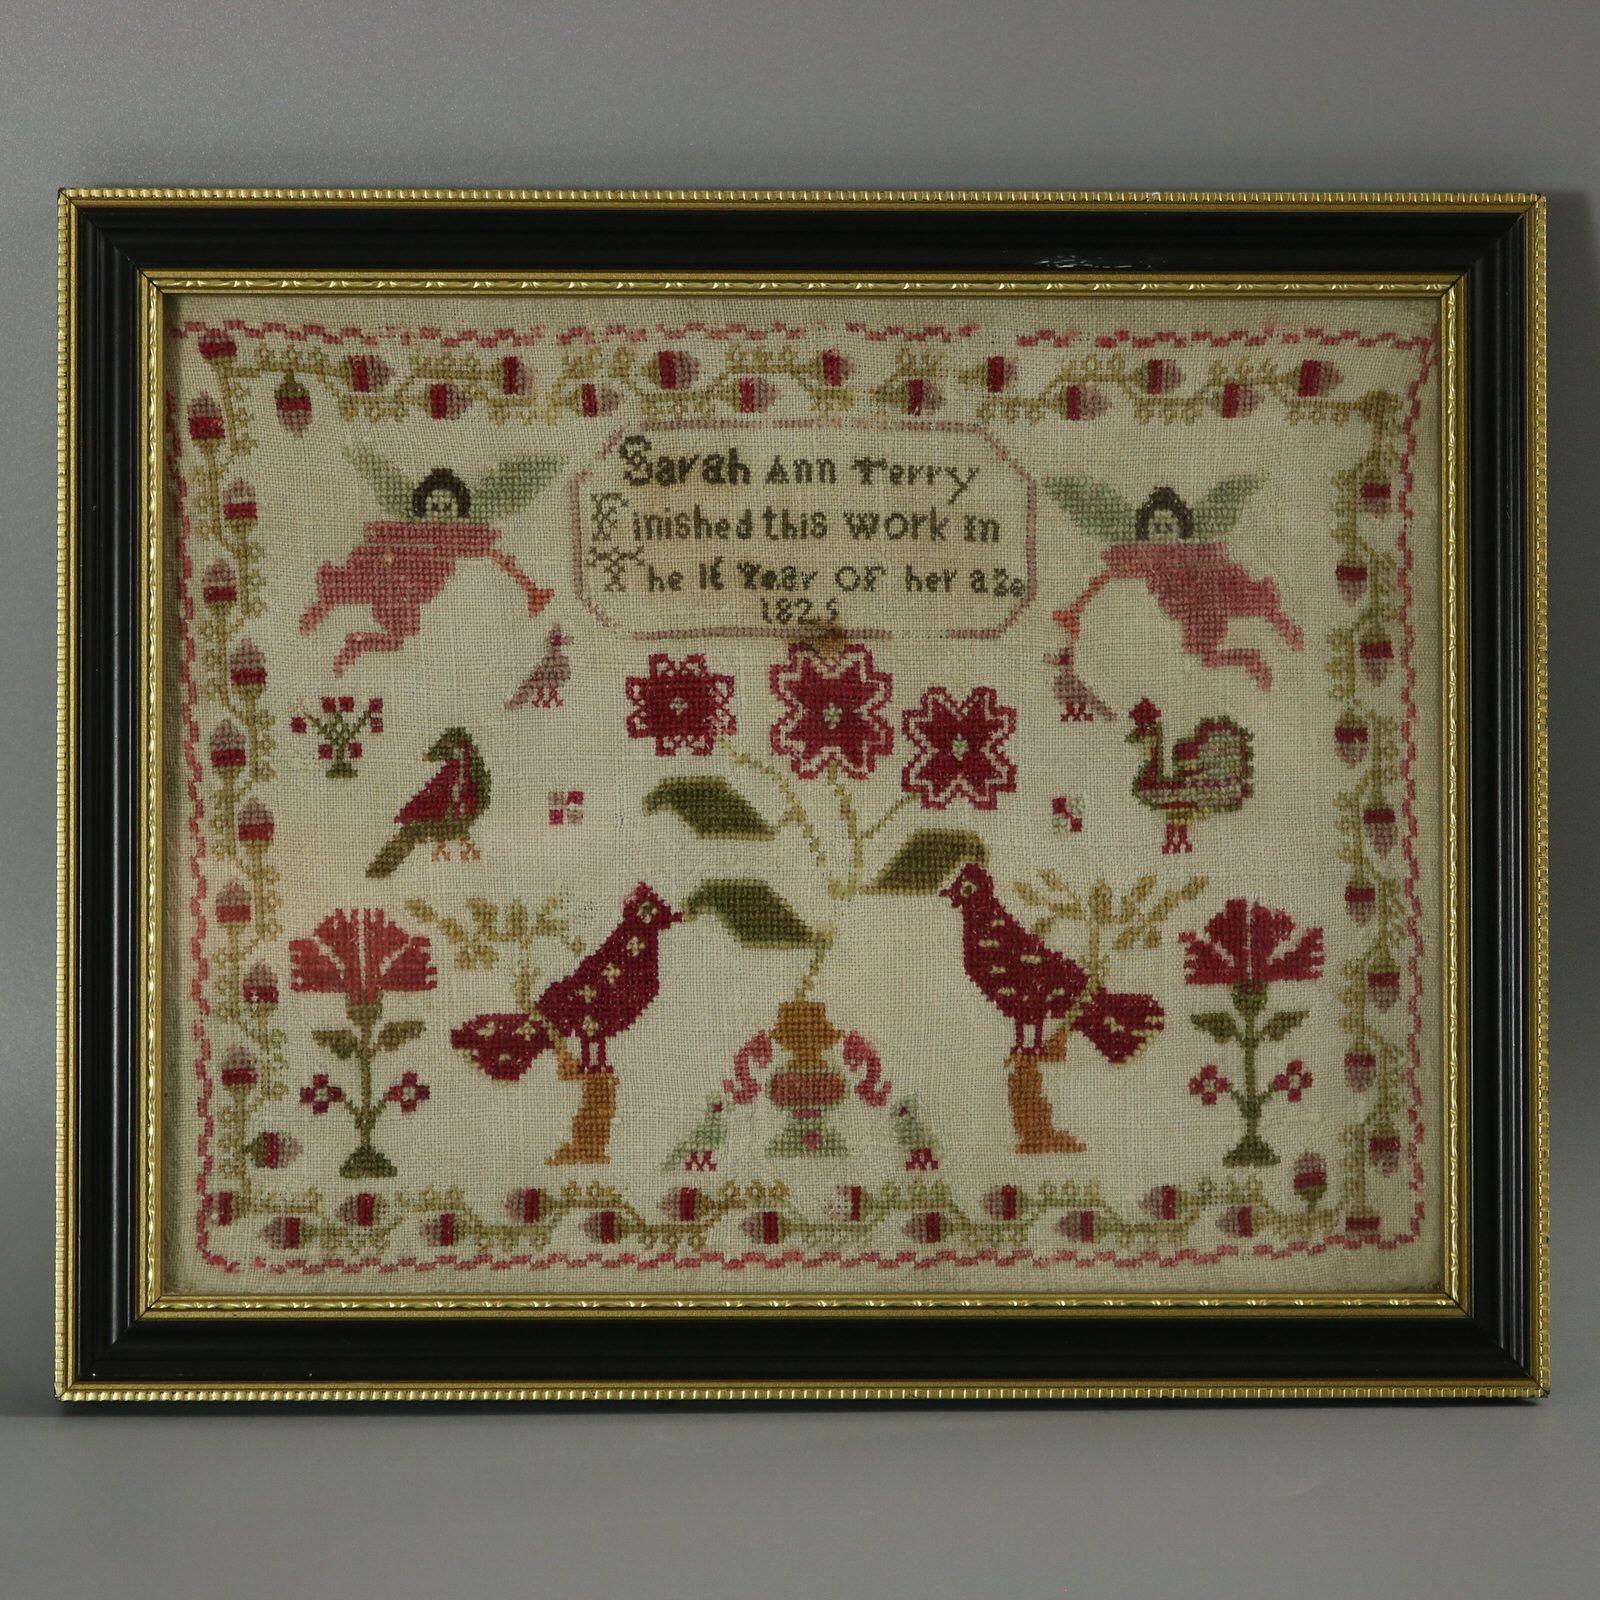 Pair of Regency Samplers, stitched in 1825 and 1829, by Sarah Ann Terry. The samplers are worked in wool threads on a linen ground, mainly in cross stitch. Meandering strawberry border. Colours red, yellow, green, pale blue, pink and black. Signed,